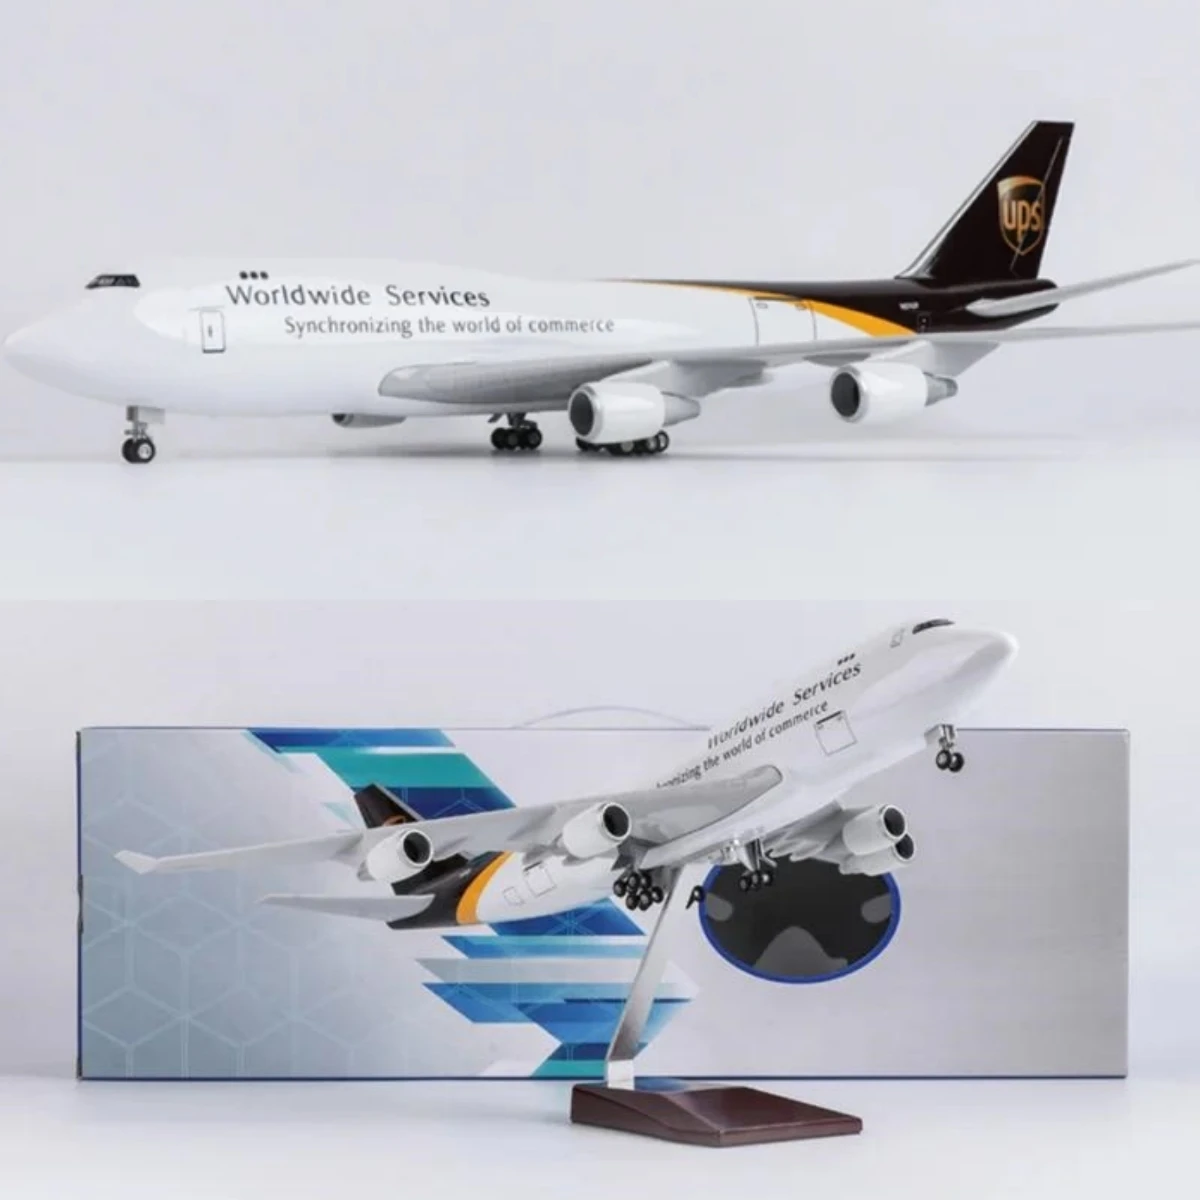 

1:150 Scale 47cm 747 Aircraft Model UPS Boeing B747 Aircraft Model Die-Cast Resin Aircraft Ornament with LED Lights for Collecti